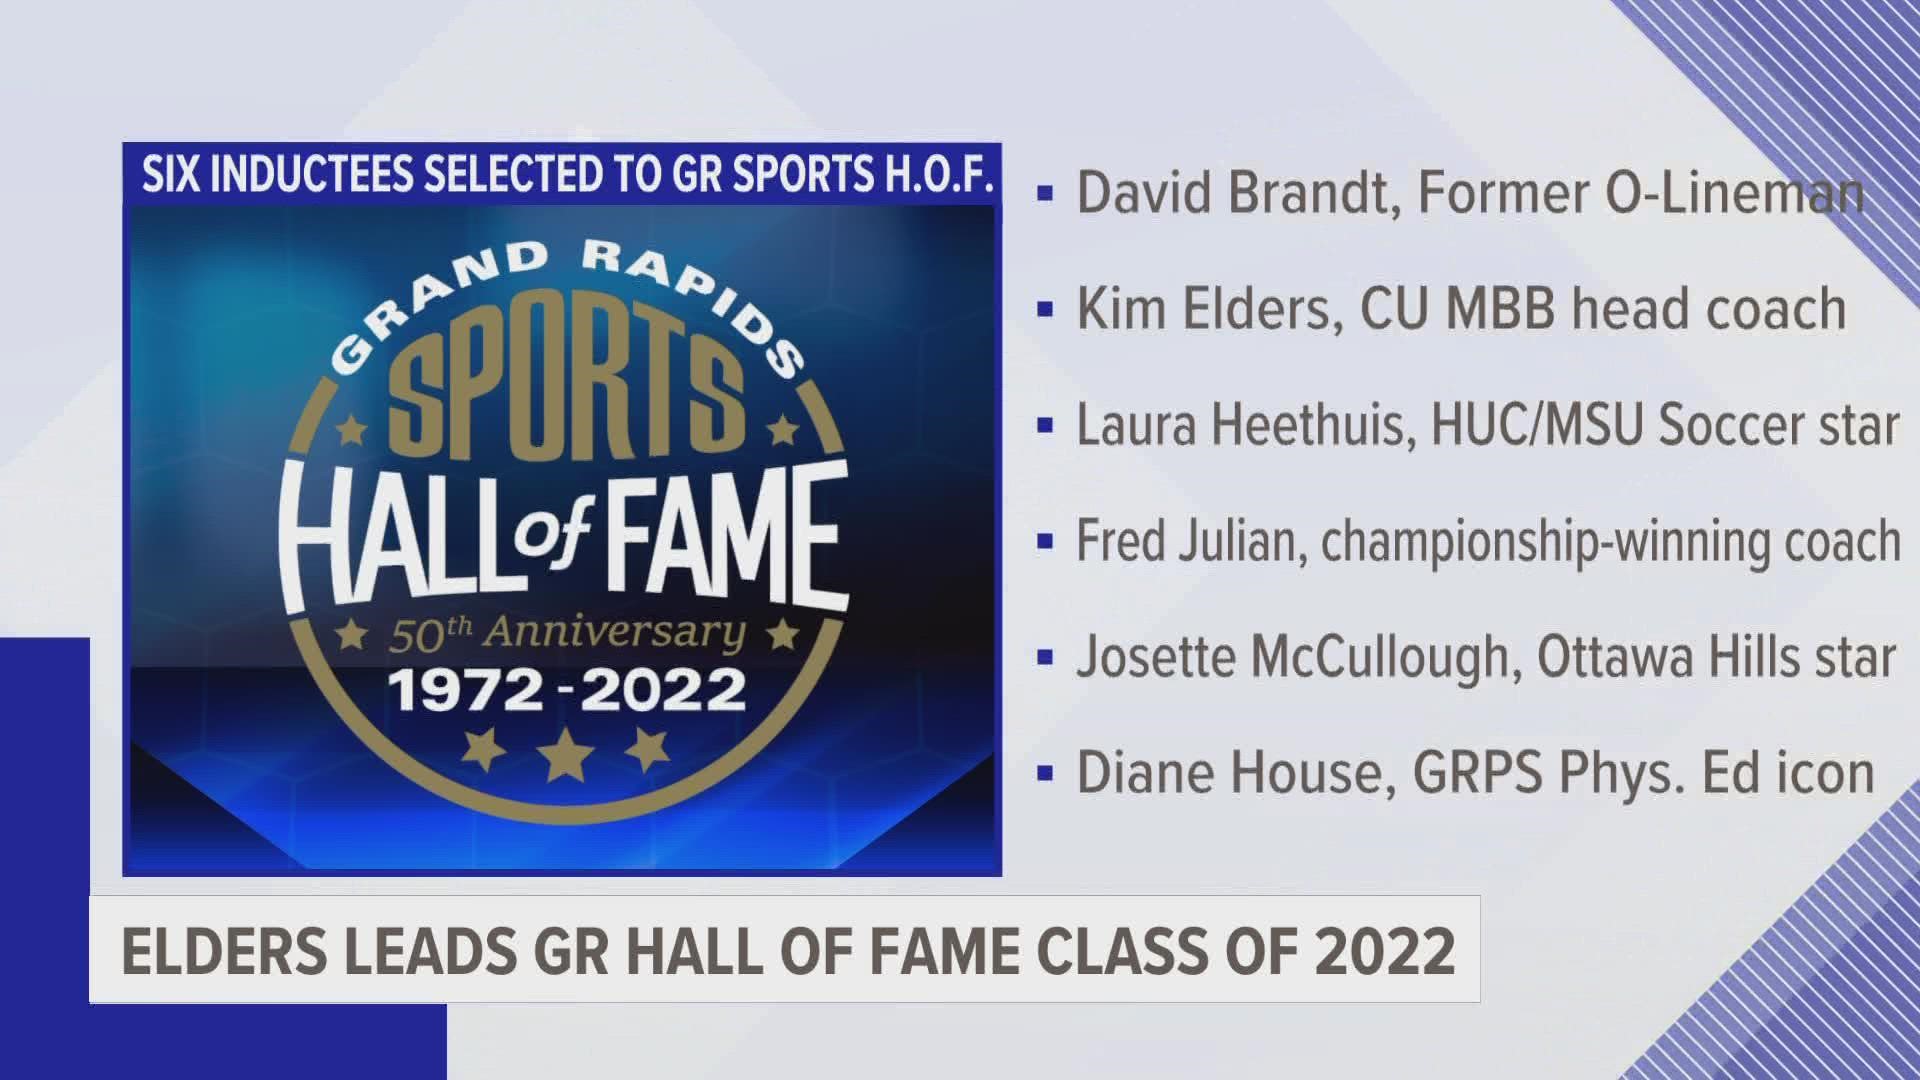 The Grand Rapids Sports Hall of Fame announced its six new inductees for the Class of 2022 on Friday.